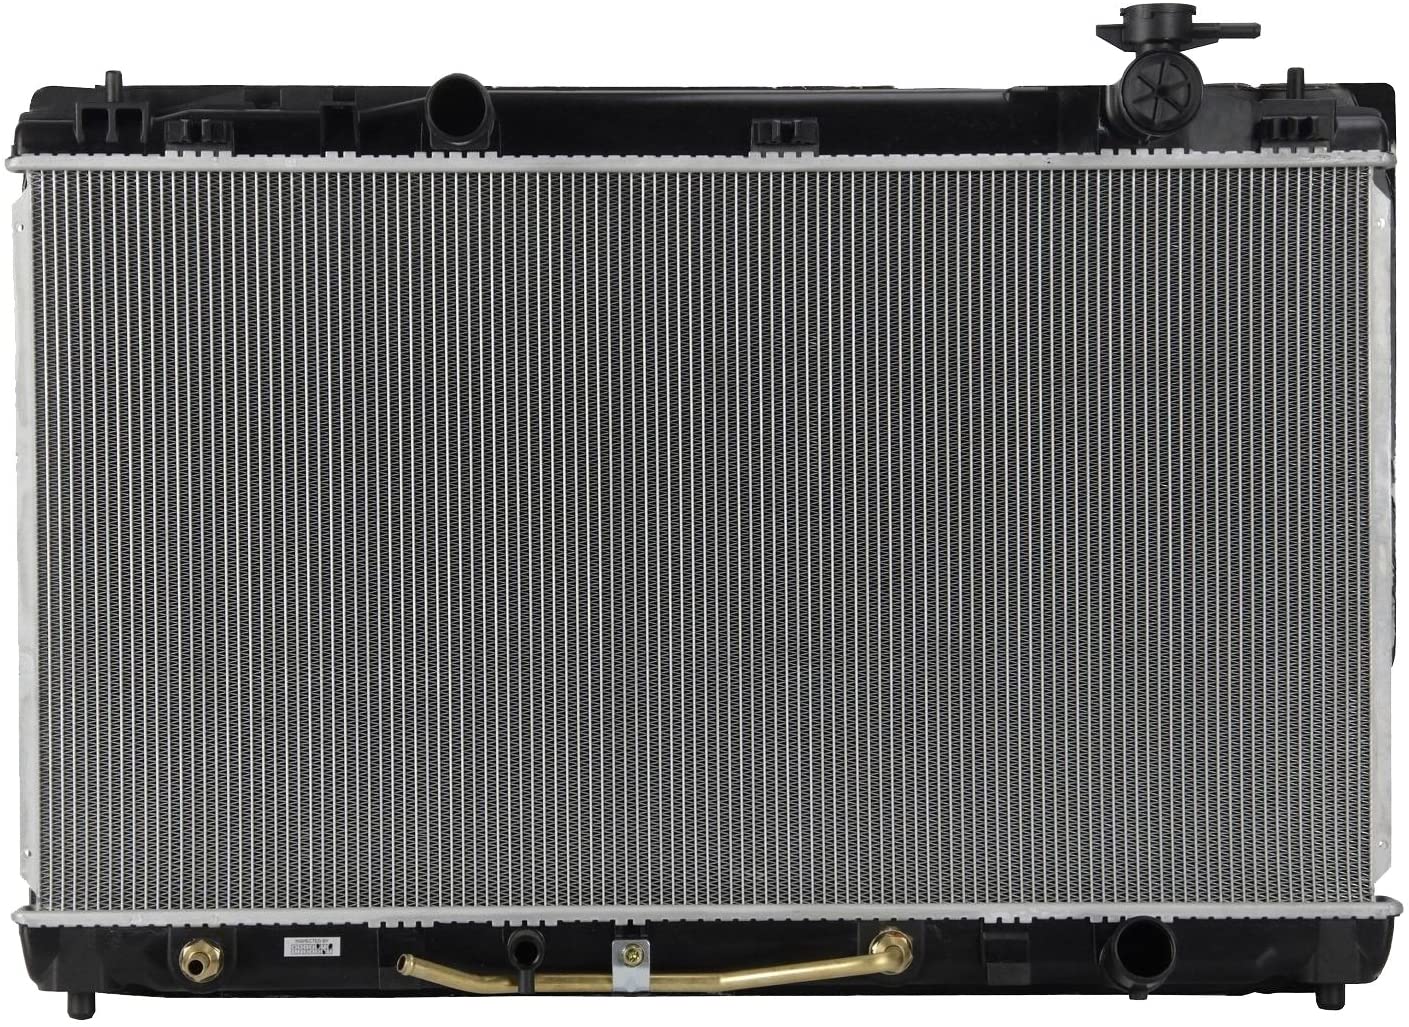 Sunbelt Radiator For Toyota Camry 2917 Drop in Fitment